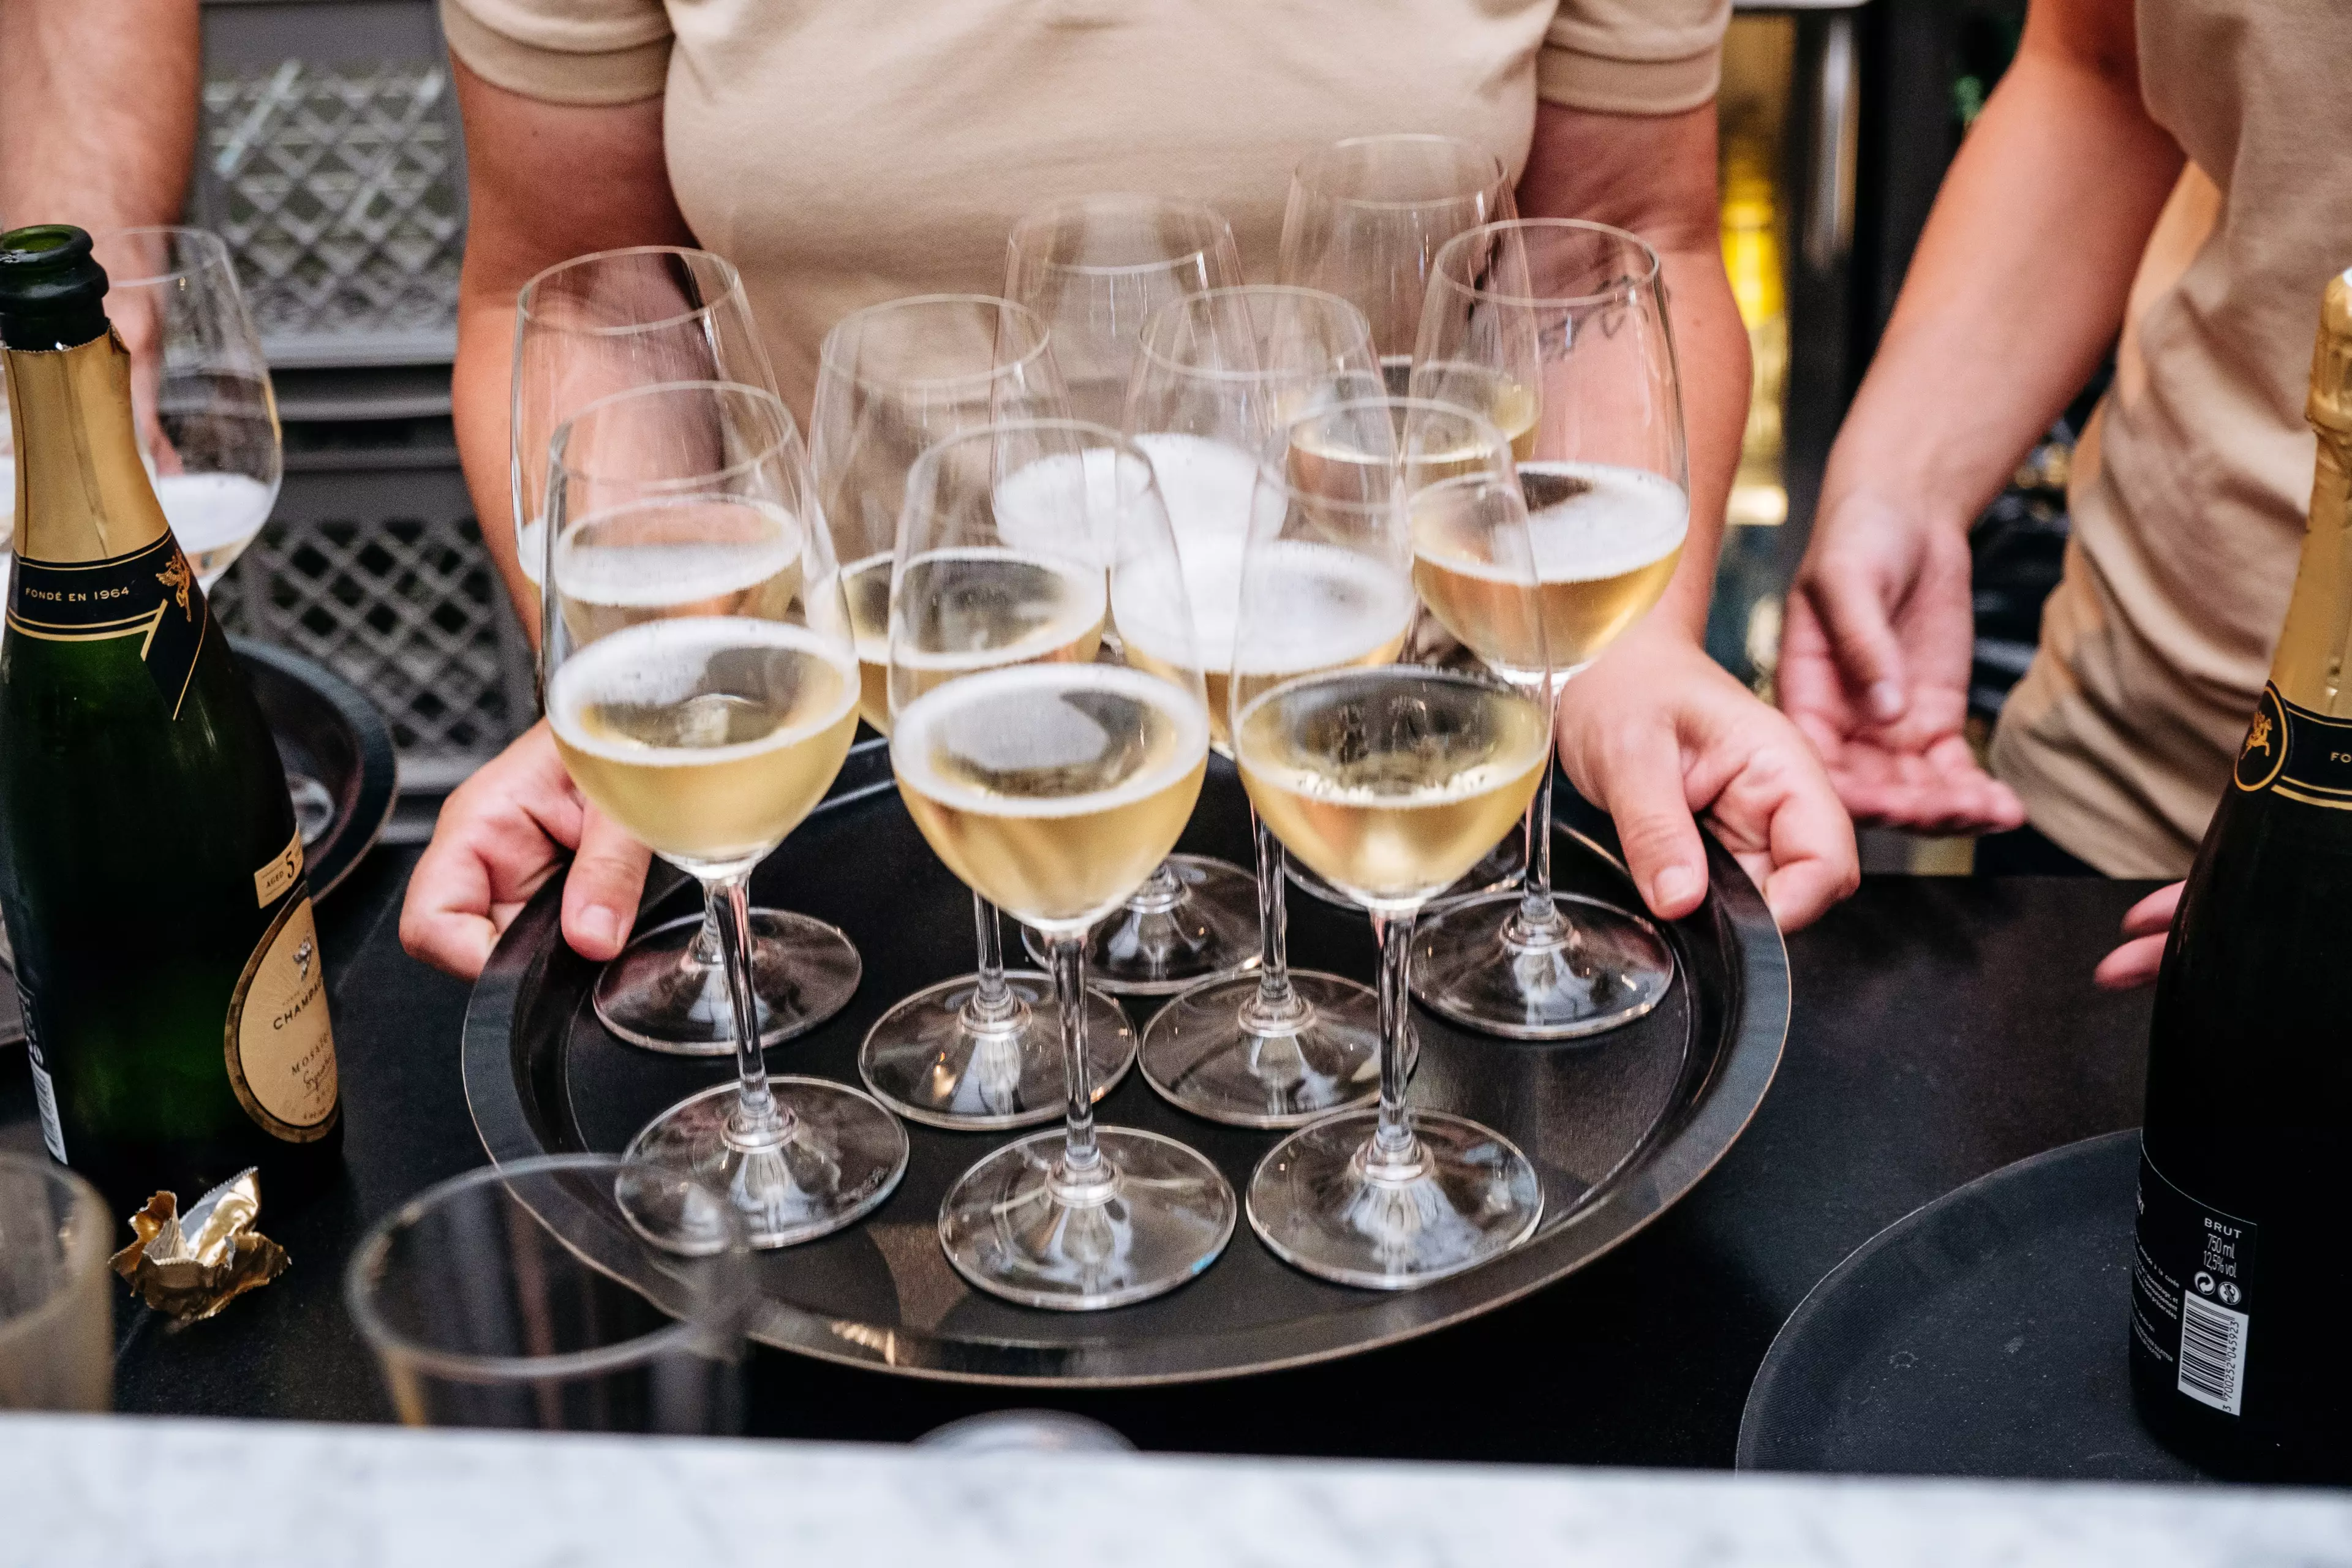 Prosecco really can give you a worse hangover (